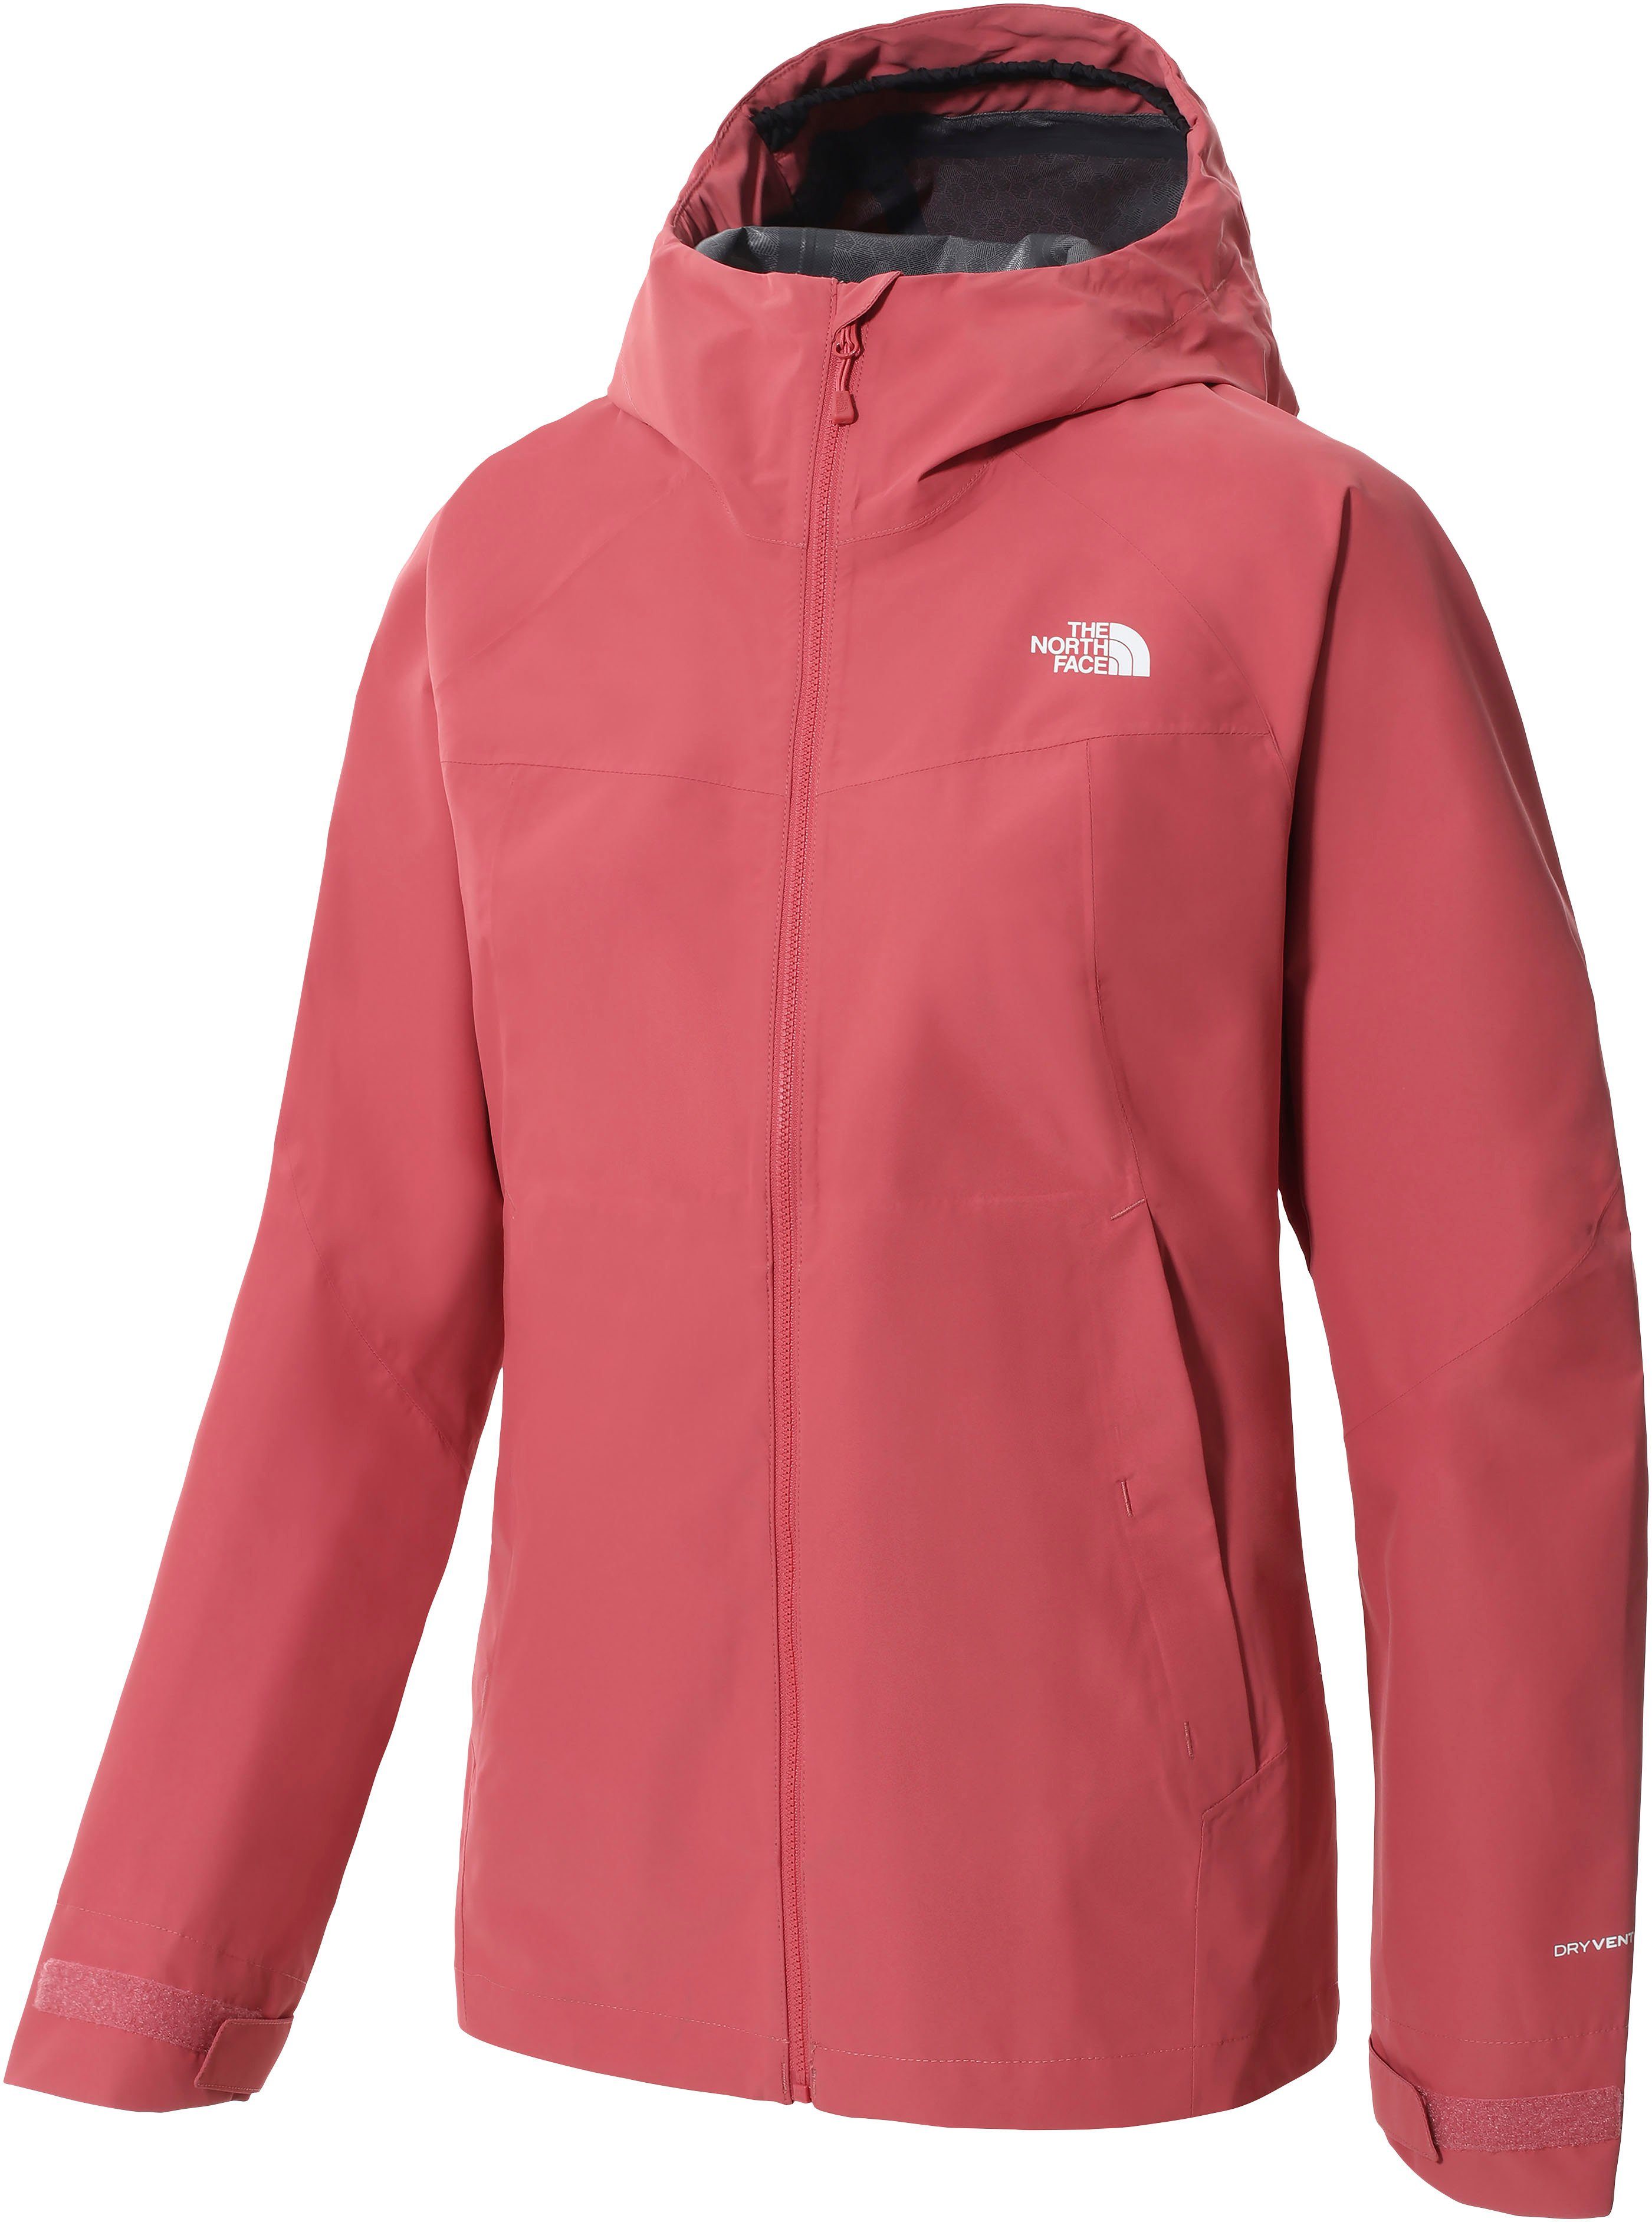 The North Face Funktionsjacke »EXTENT III« kaufen | OTTO